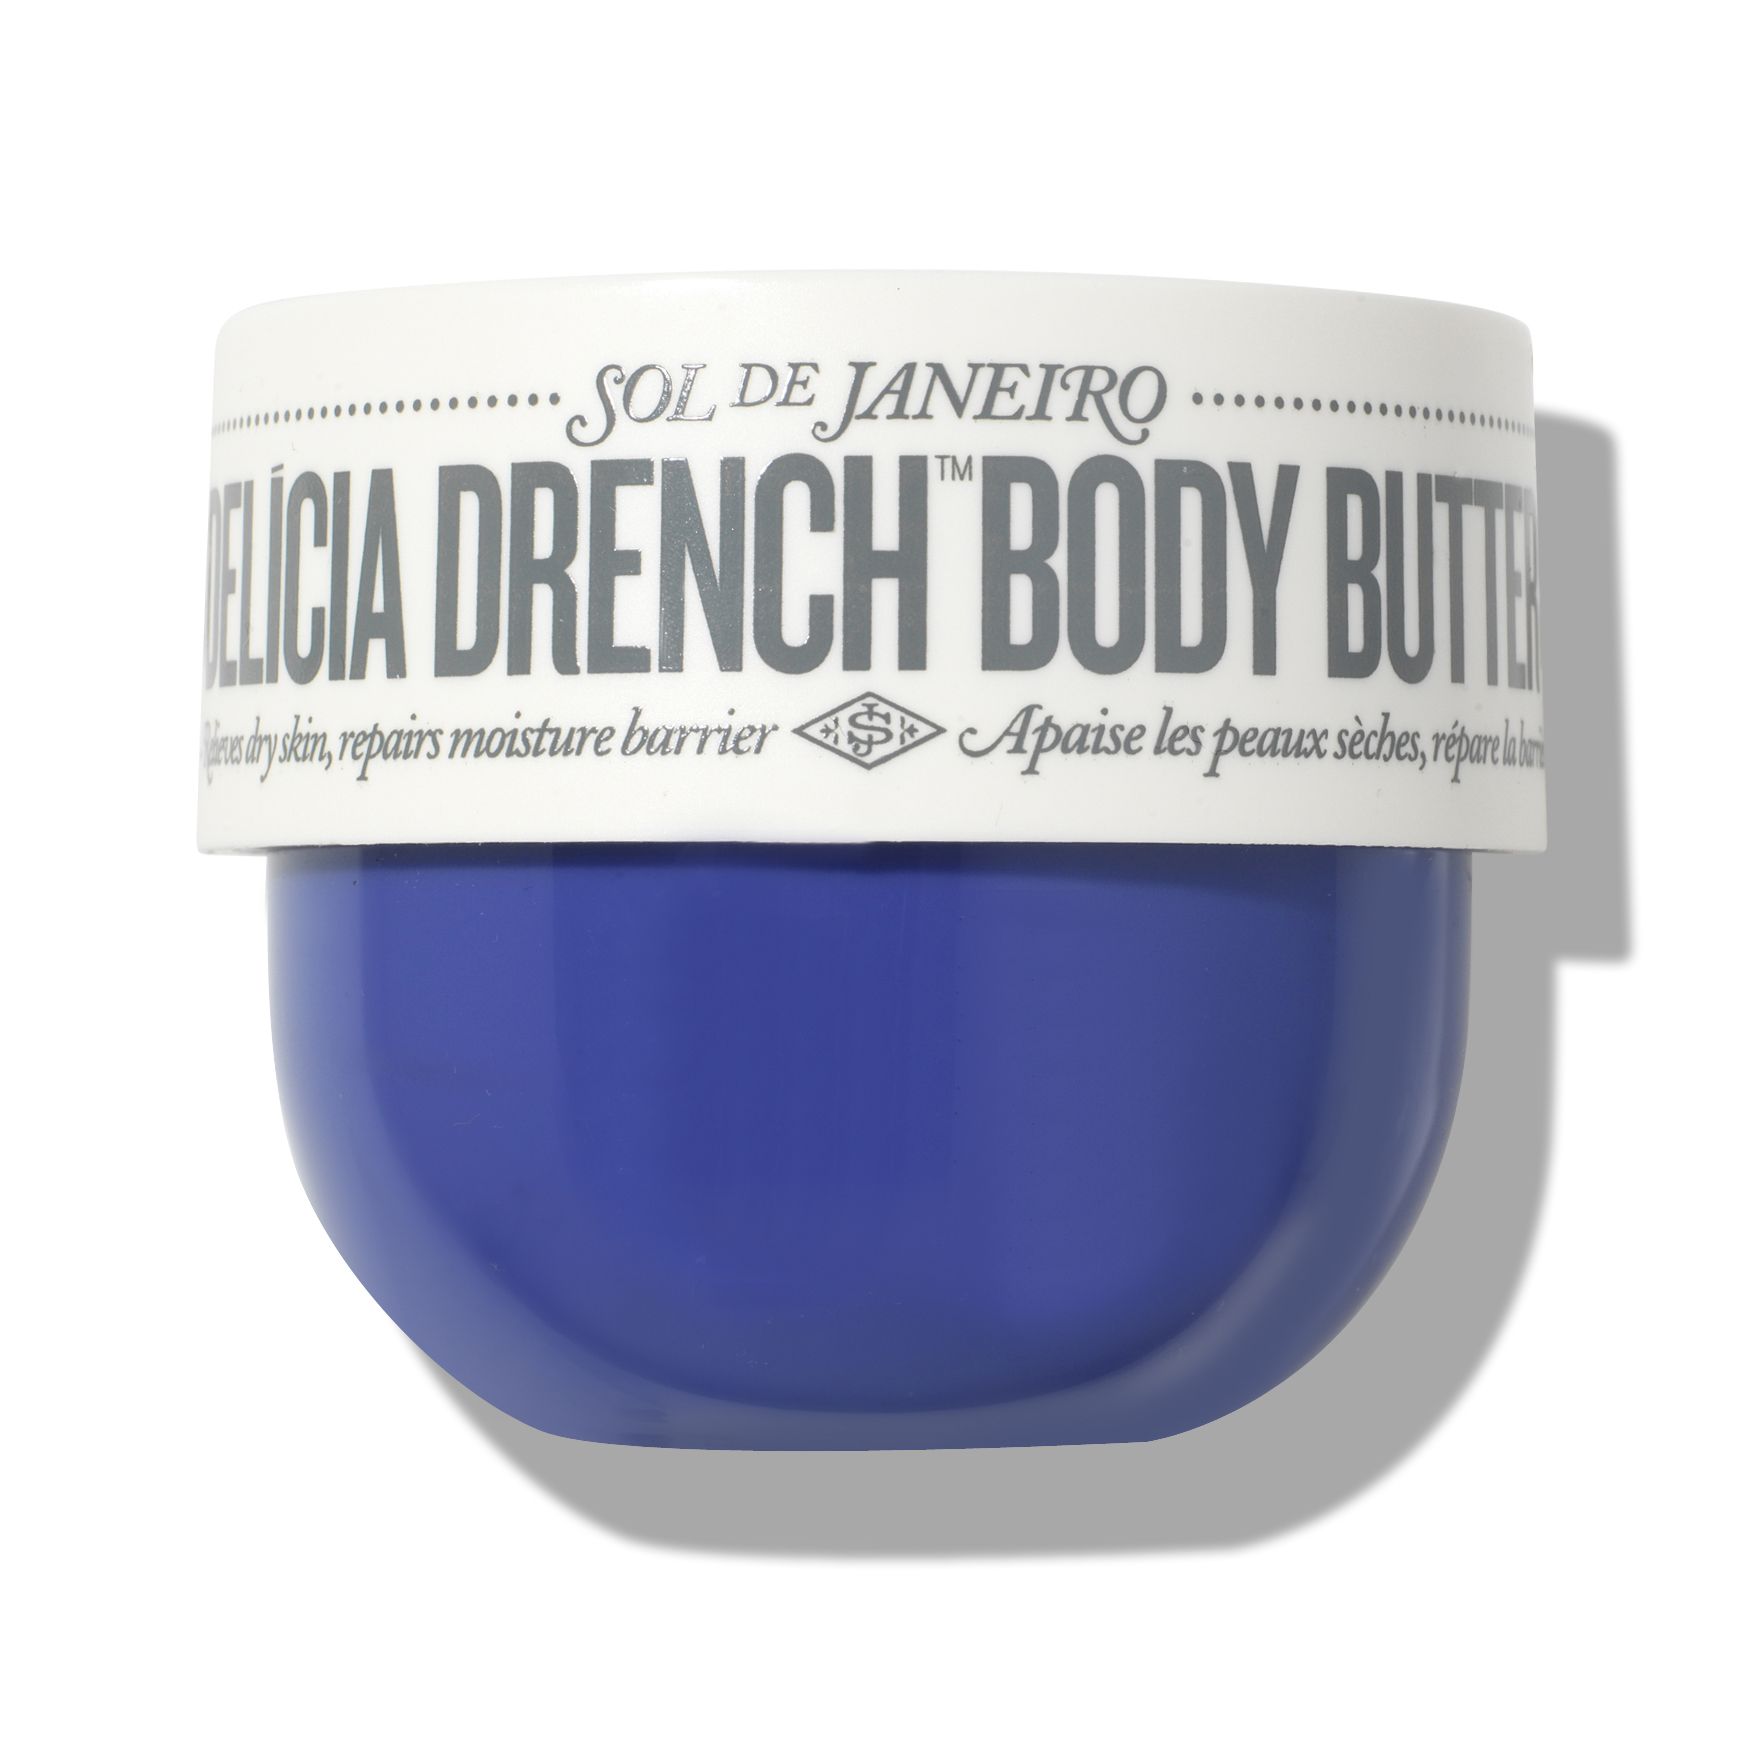 Delicia Drench Body Butter | Space NK - UK